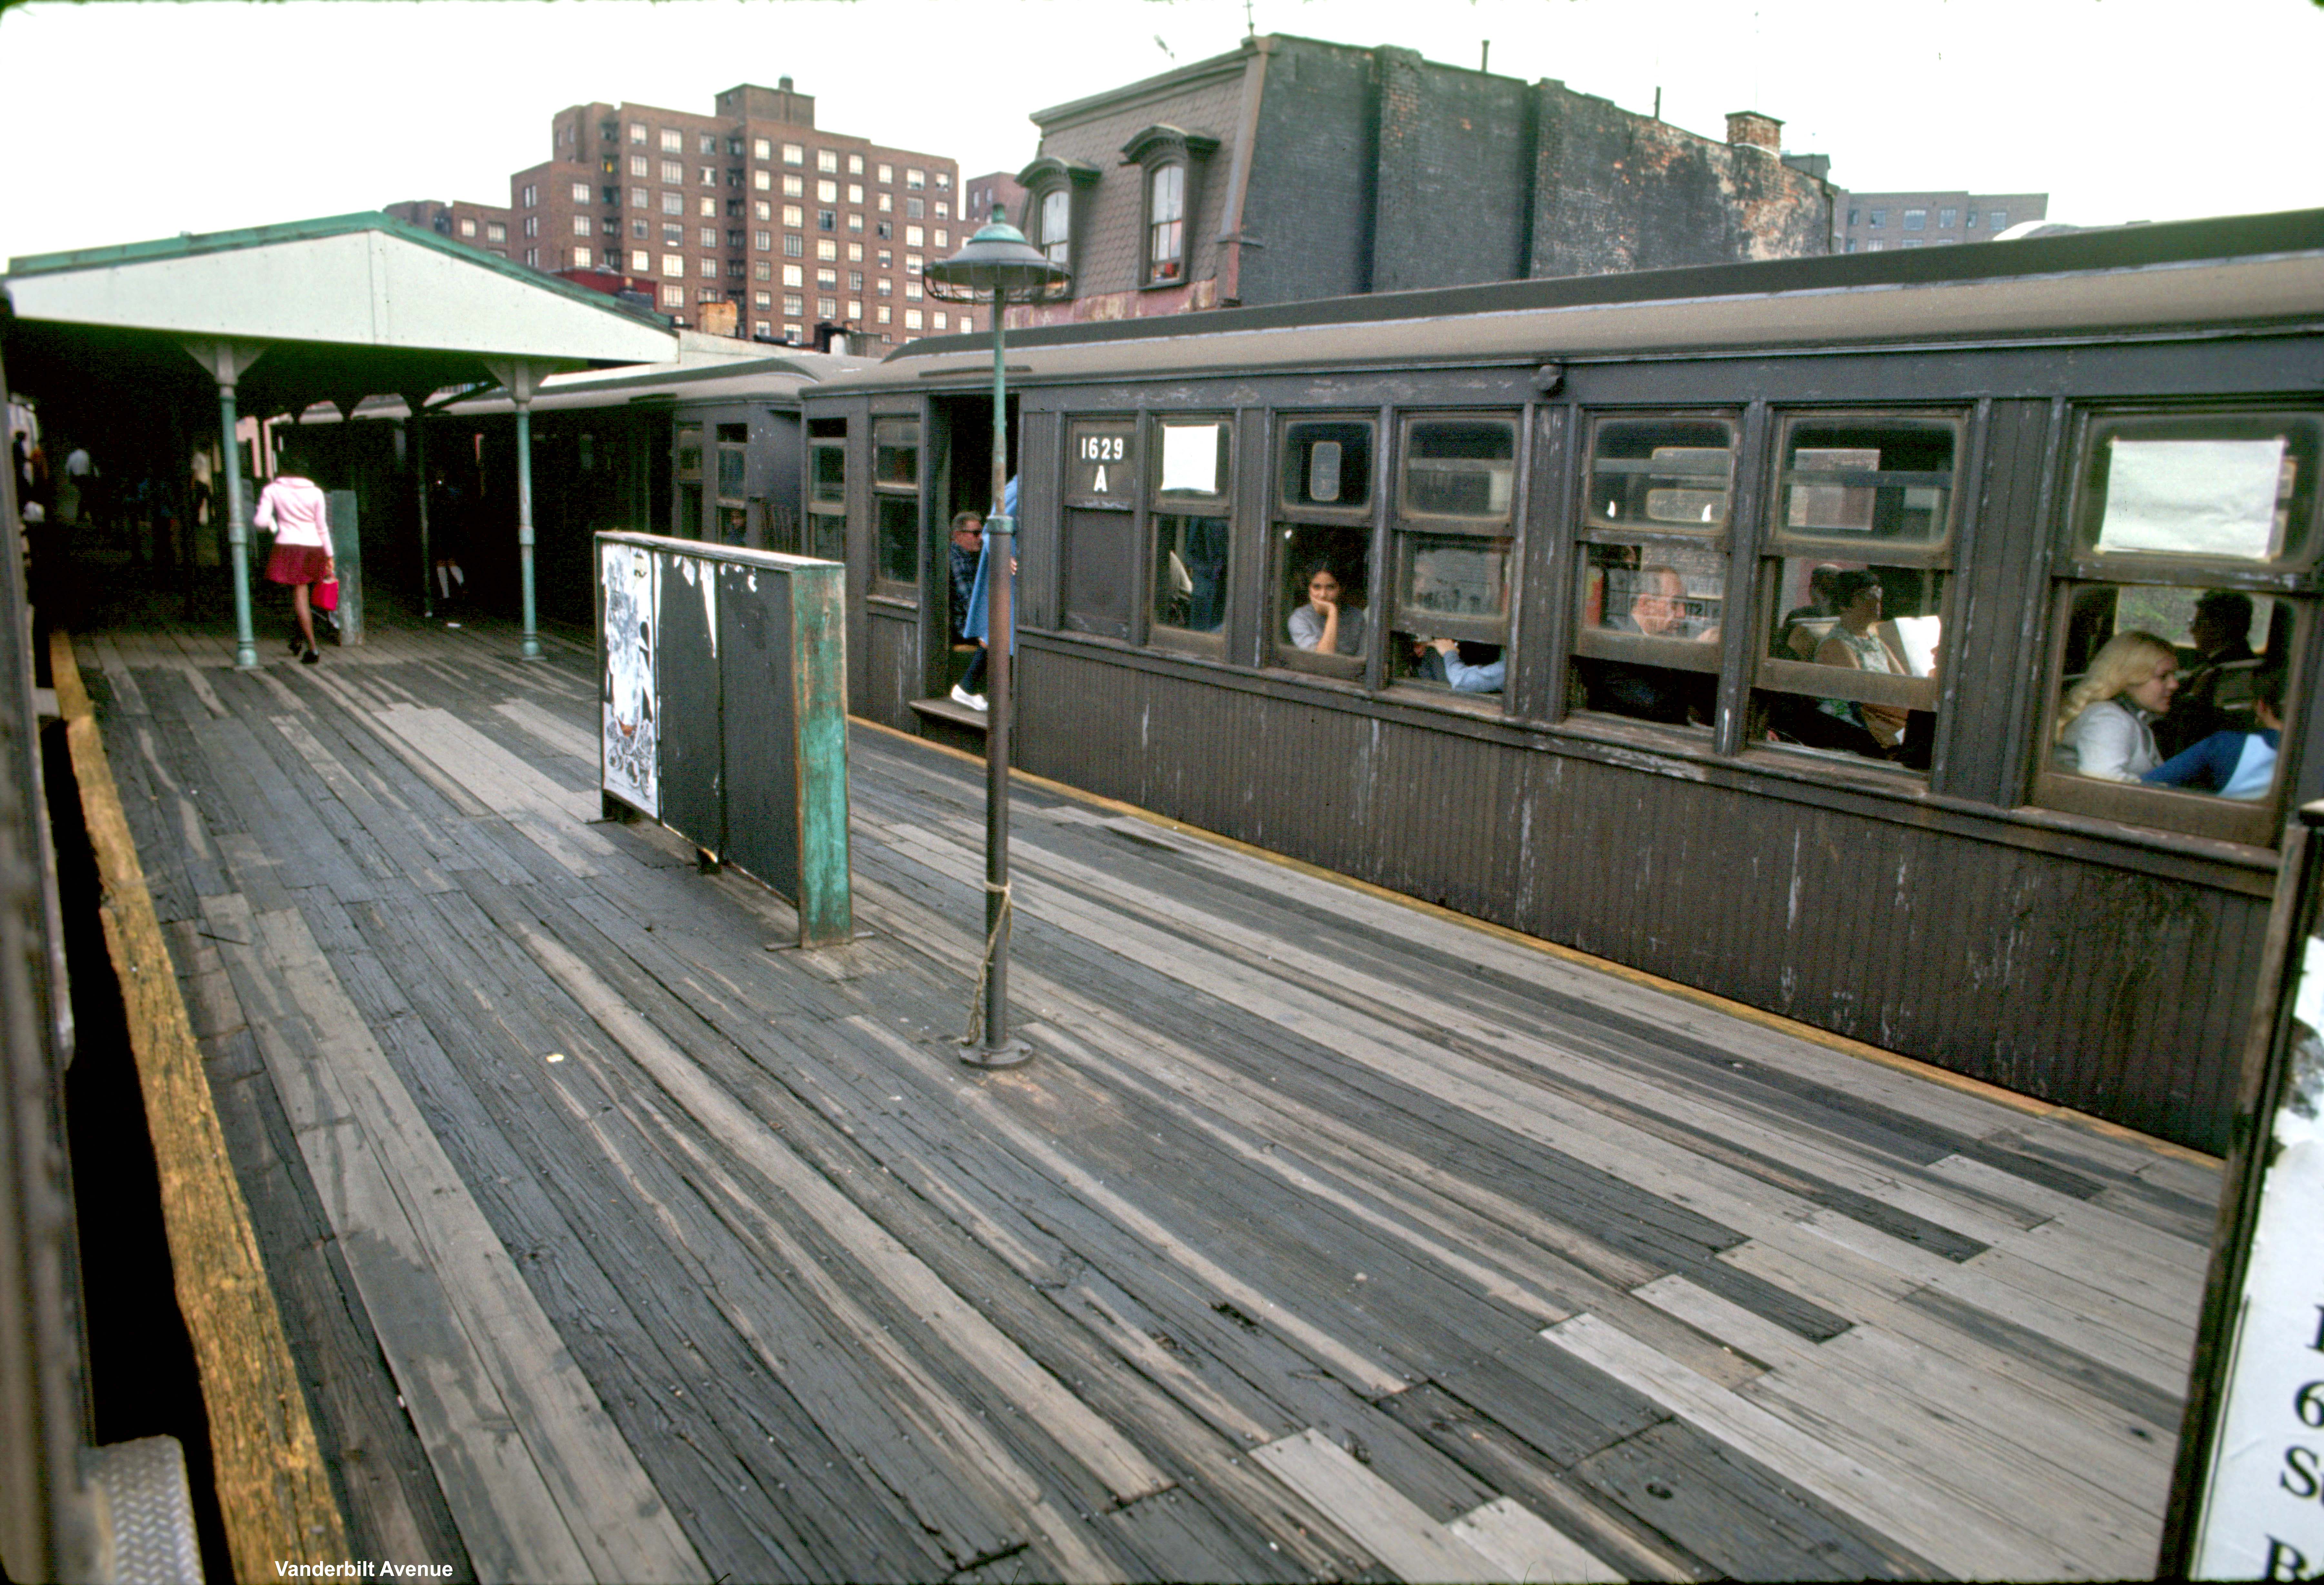 A train heading out of the Vanderbilt Avenue Station, October 1969.